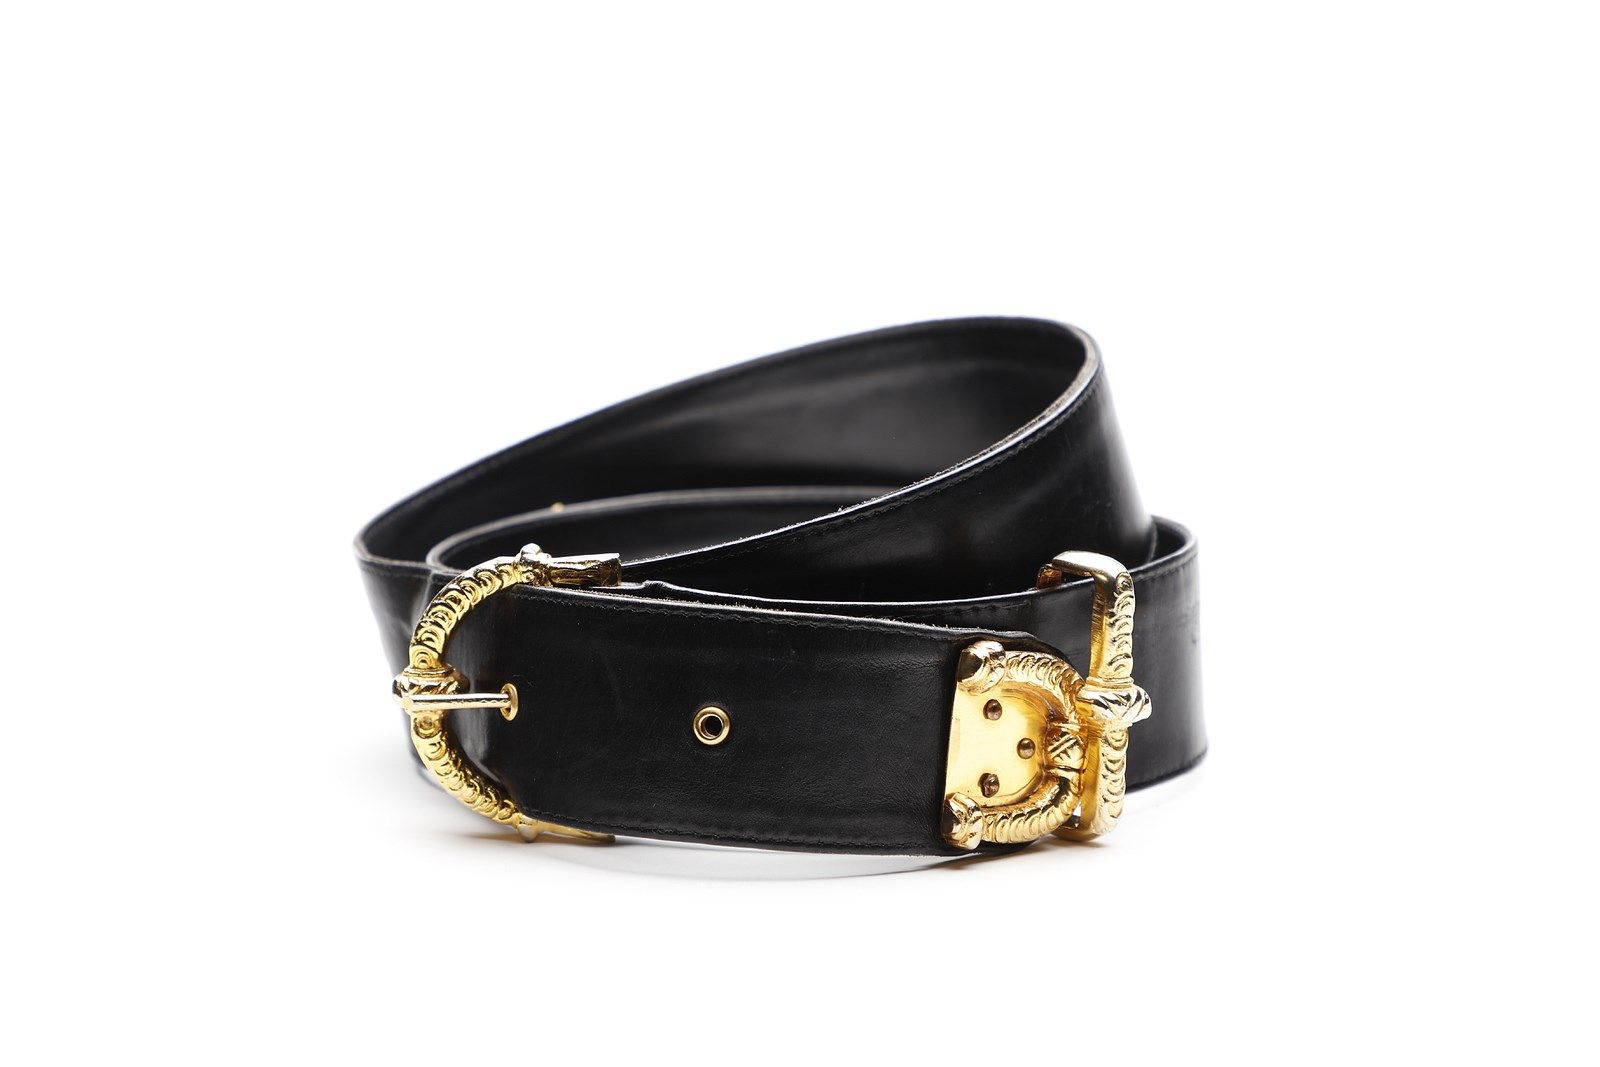 ROBERTA DI CAMERINO Black leather belt with buckle and gold-colored metallic fin&hellip;